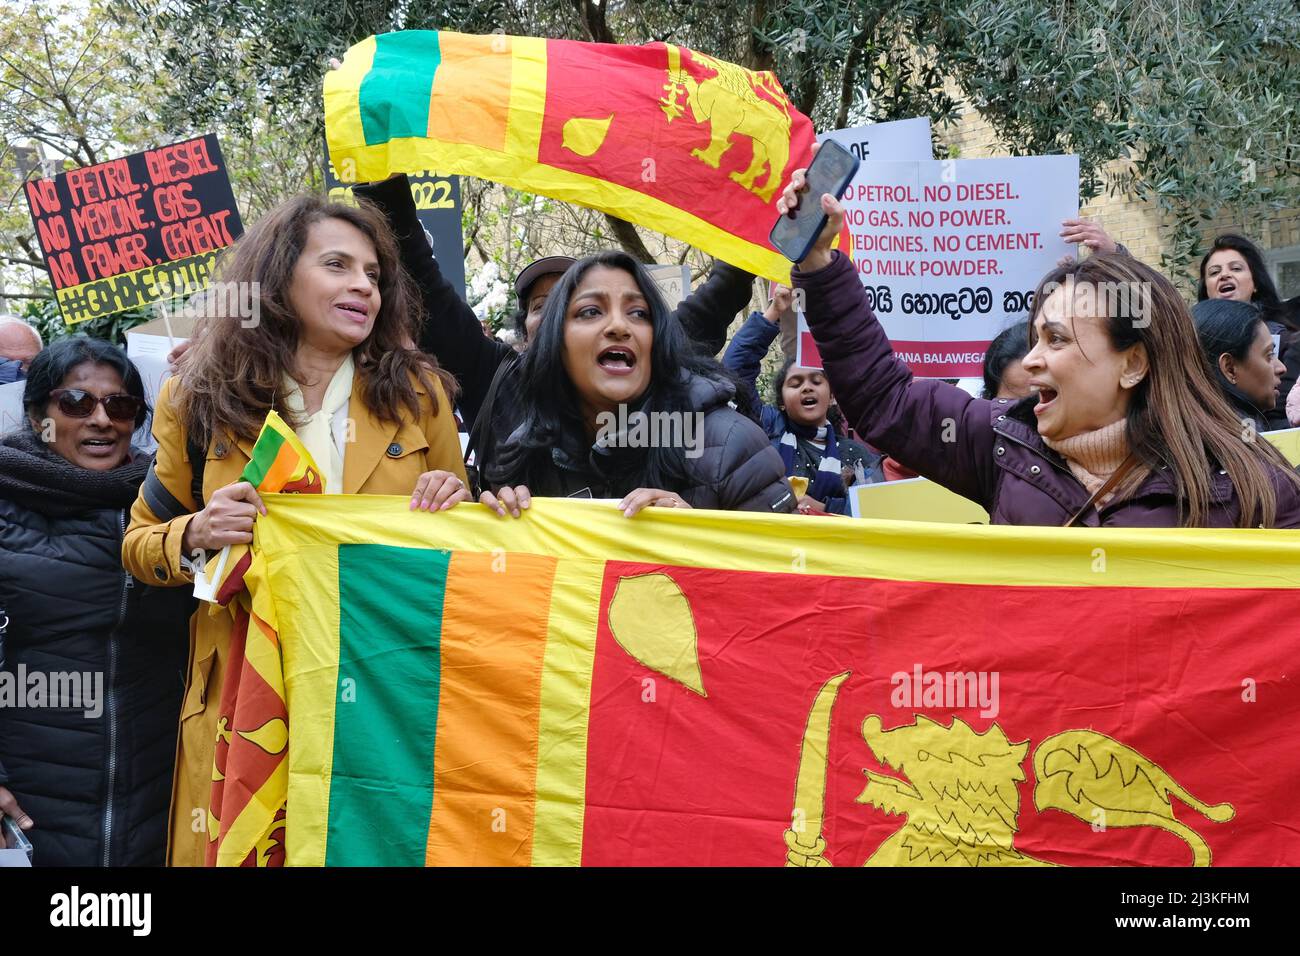 London, UK, 8th April, 2022. The Sri Lankan diaspora demonstrated outside the High Commission in support of their fellow citizens, after fuel, food, medicine and gas shortages sparked-off mass public protests in the South Asian nation.  Protesters also called for the resignation of President Gotabaya Rajapaksa as an economic crisis grips Sri Lanka with the belief that financial mismanagement and corruption within the government has worsened the situation. Credit: Eleventh Hour Photography/Alamy Live News Stock Photo